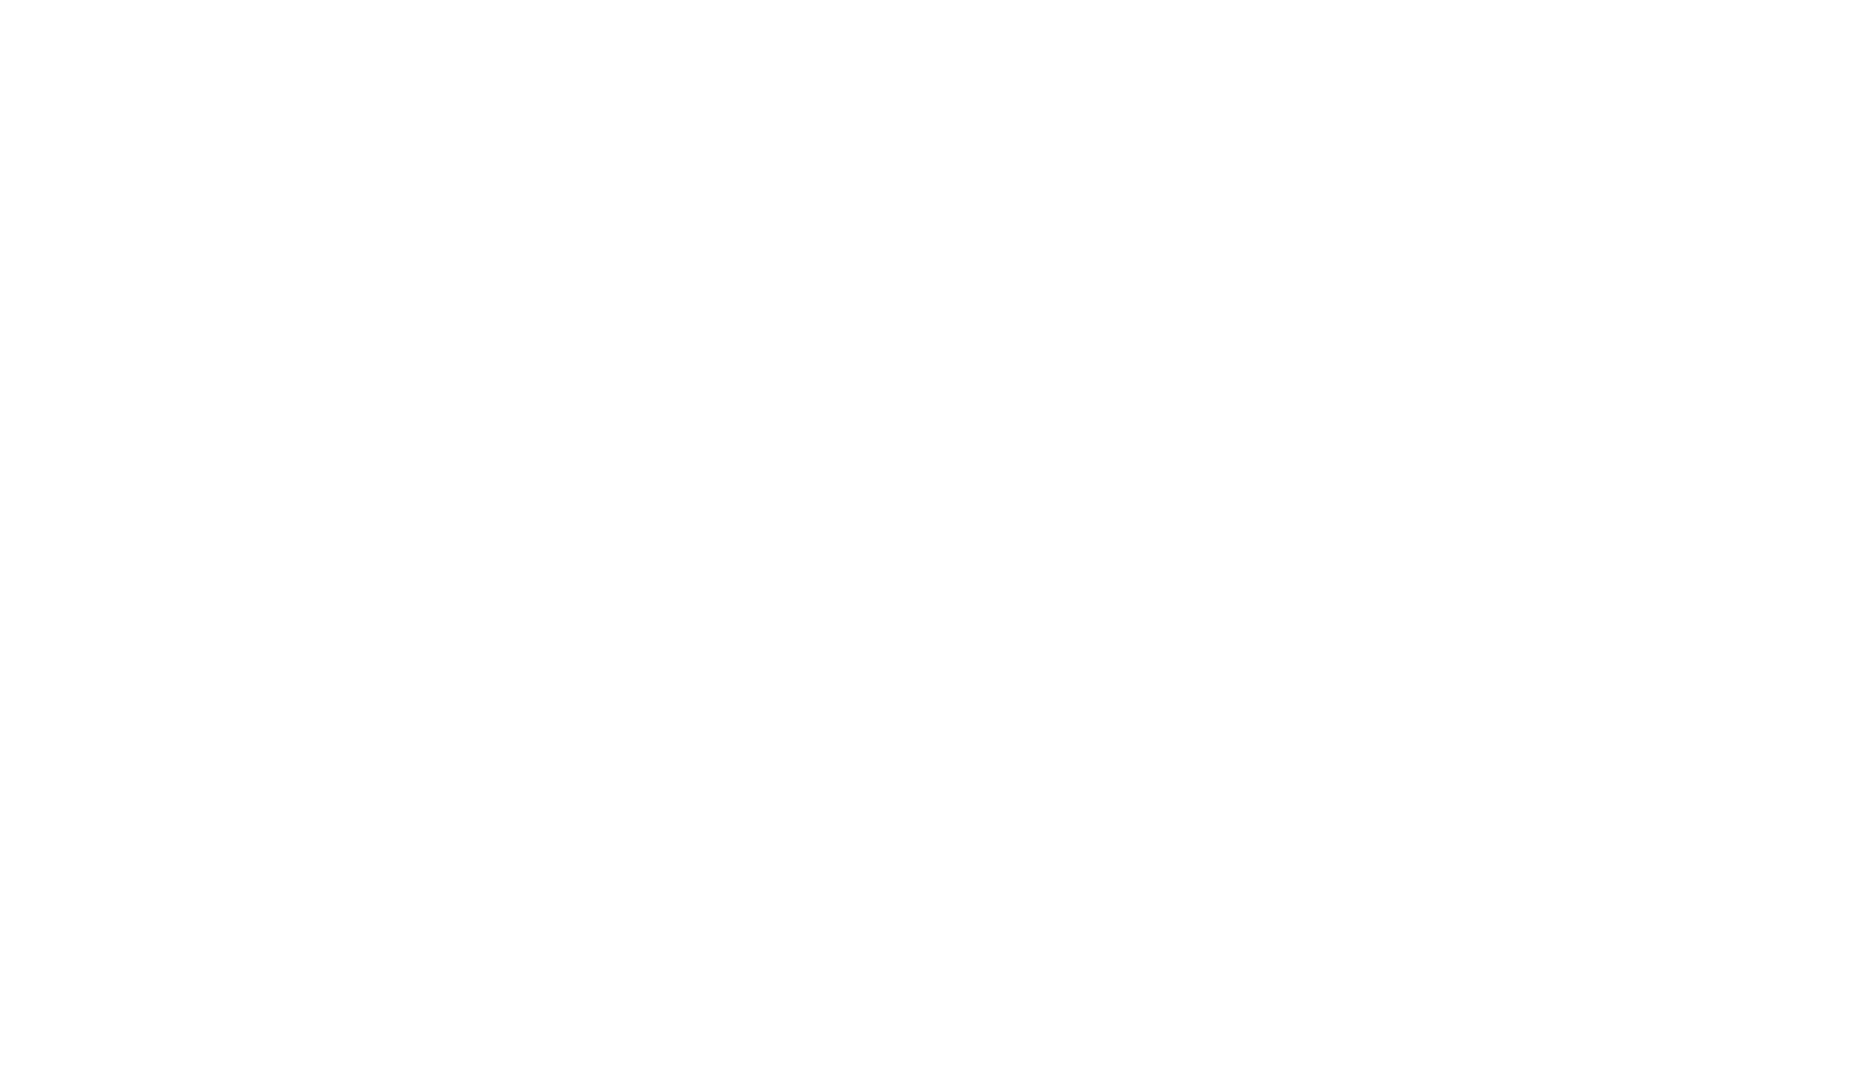 Nino Brothers Janitorial Services